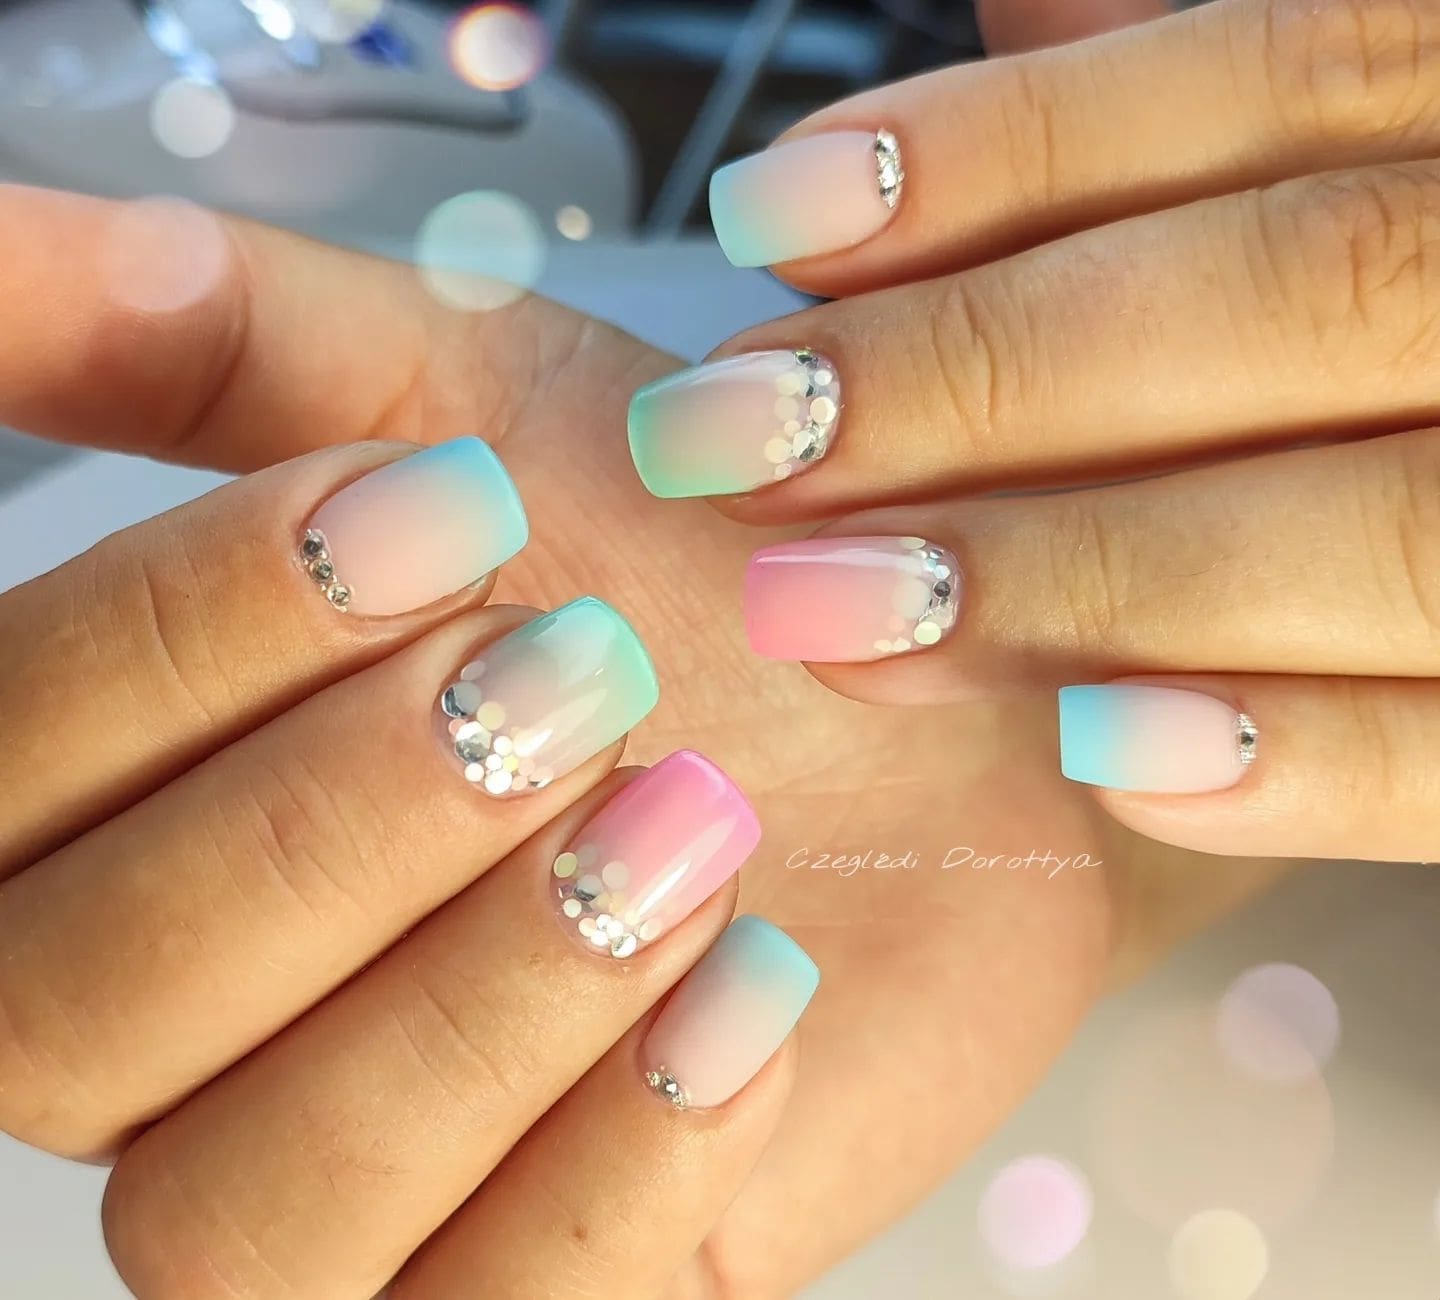 French Ombre Nails With Glitter - 37 Manicure Ideas Not Just For Christmas